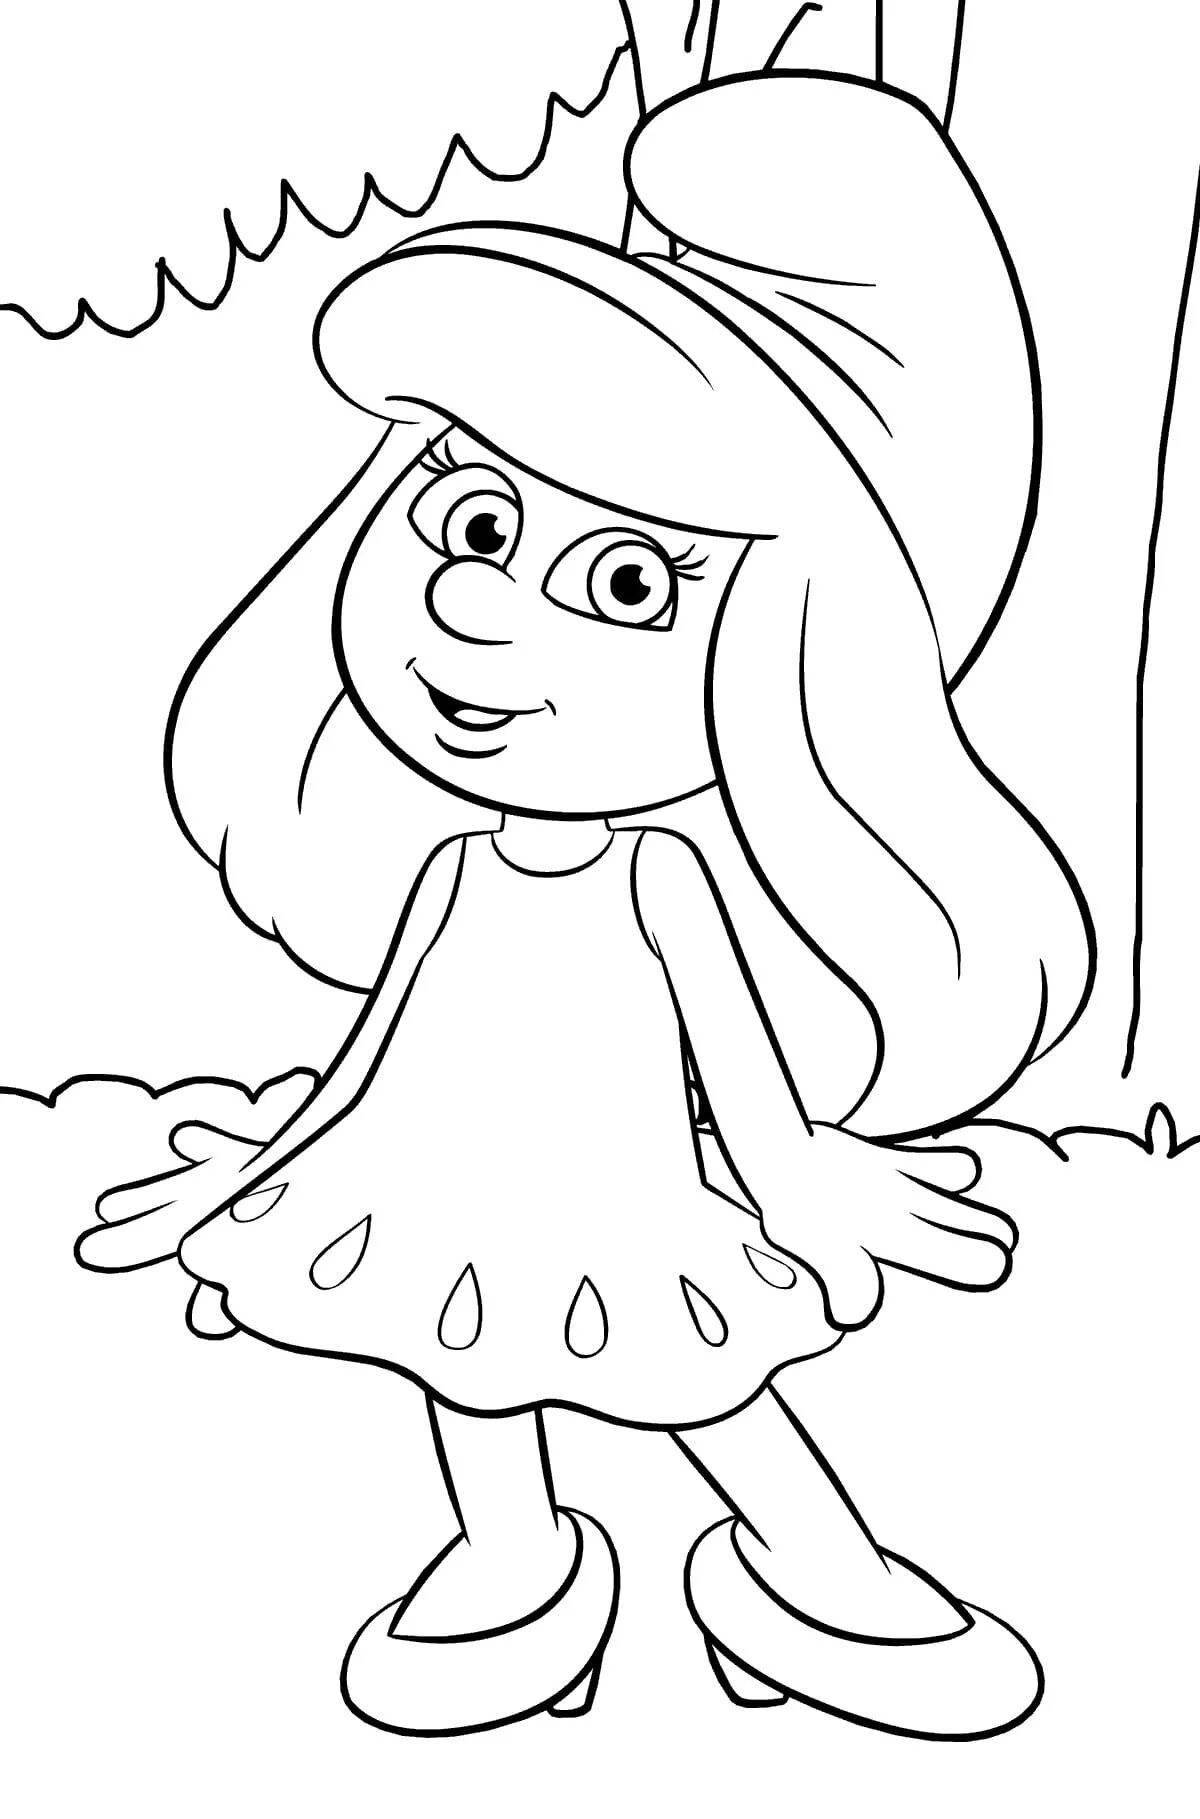 Coloring book for 3 year old cartoons